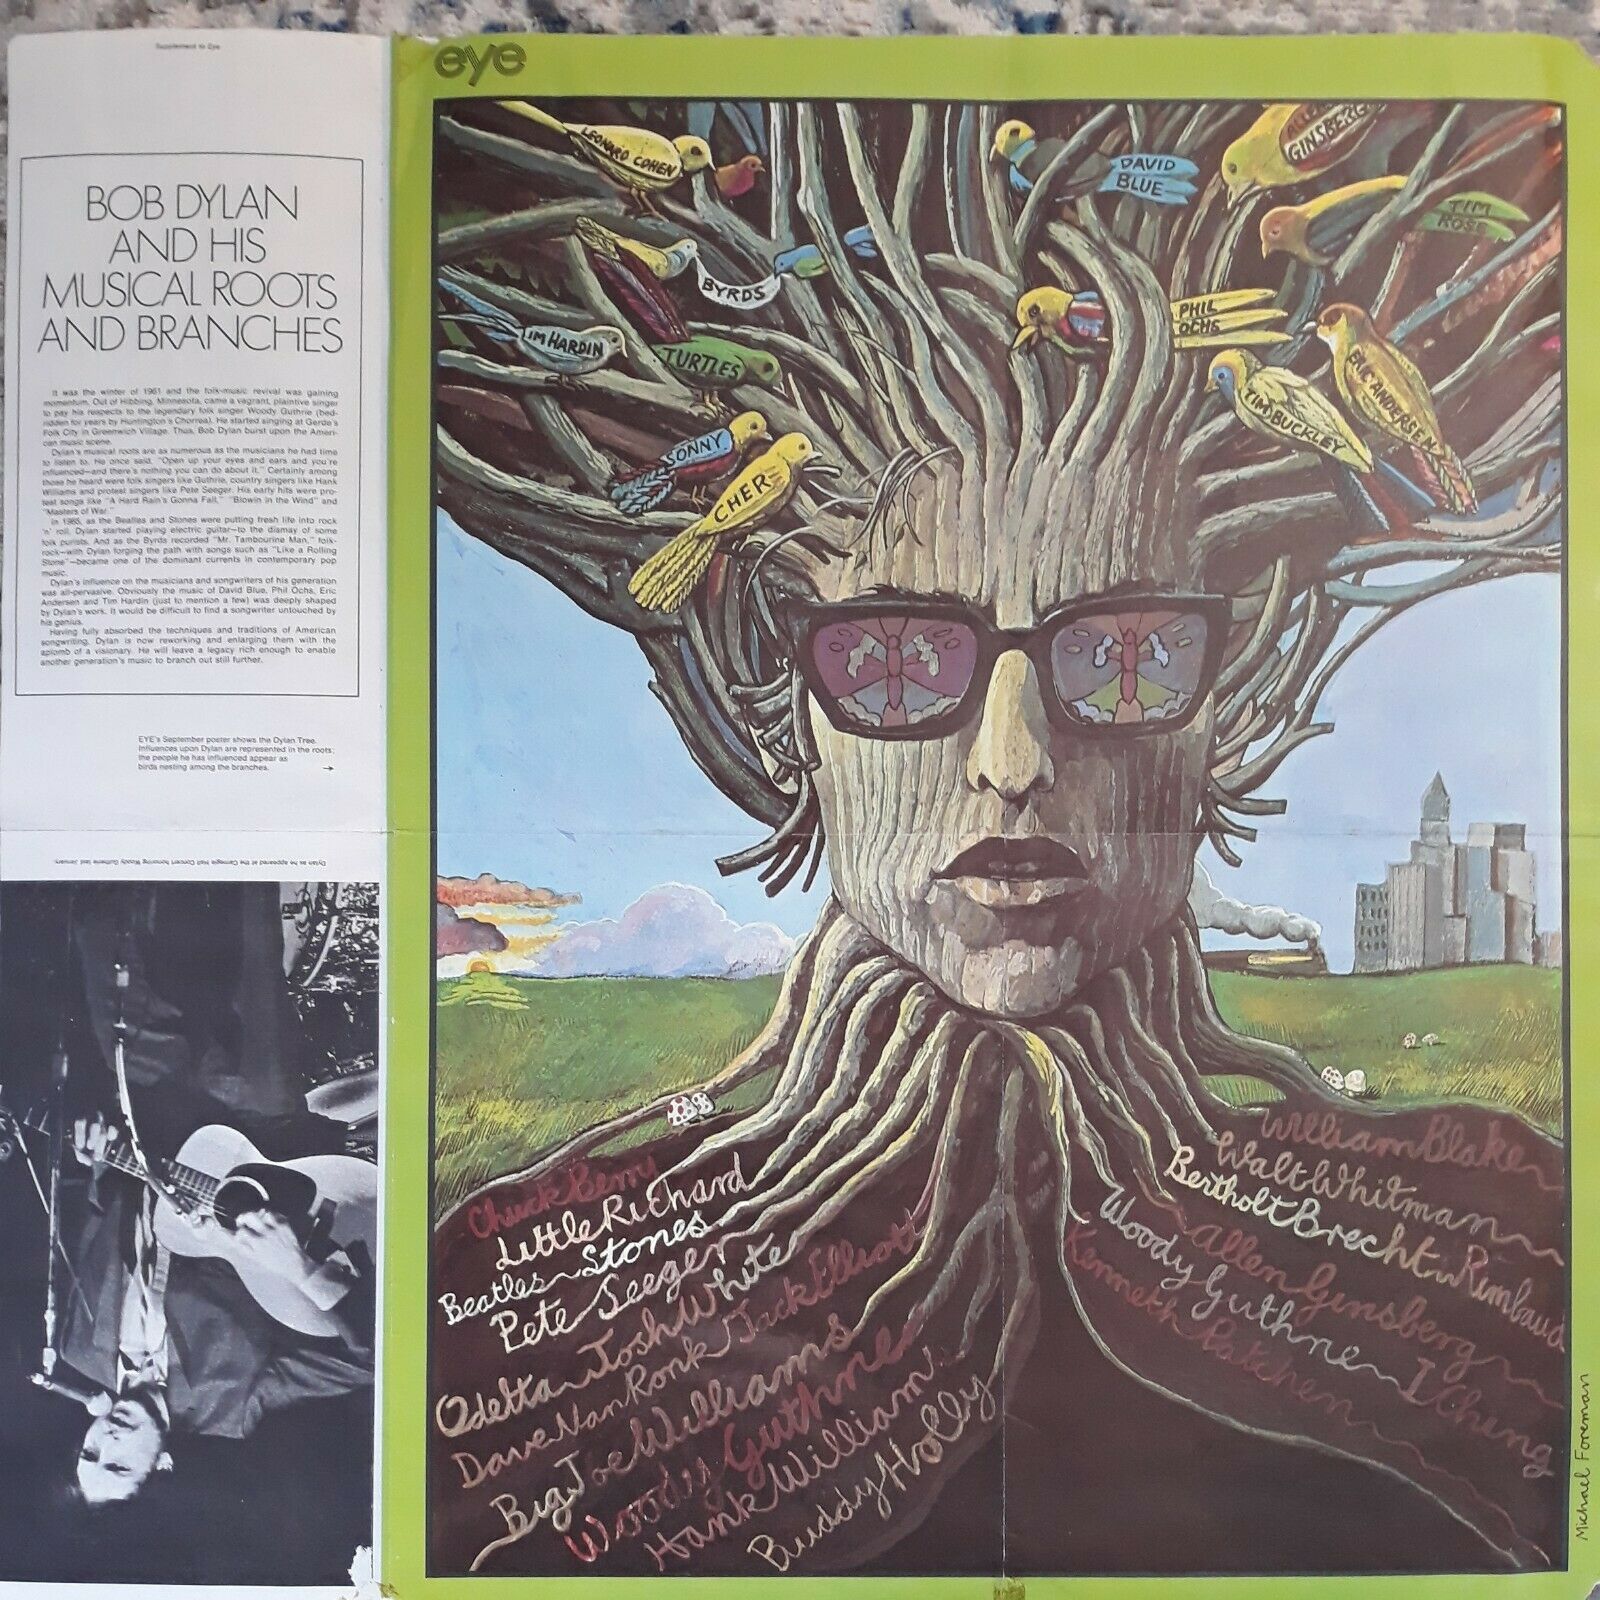 Bob Dylan - Musical Roots & Branches - Original Eye Magazine Poster With Info!!